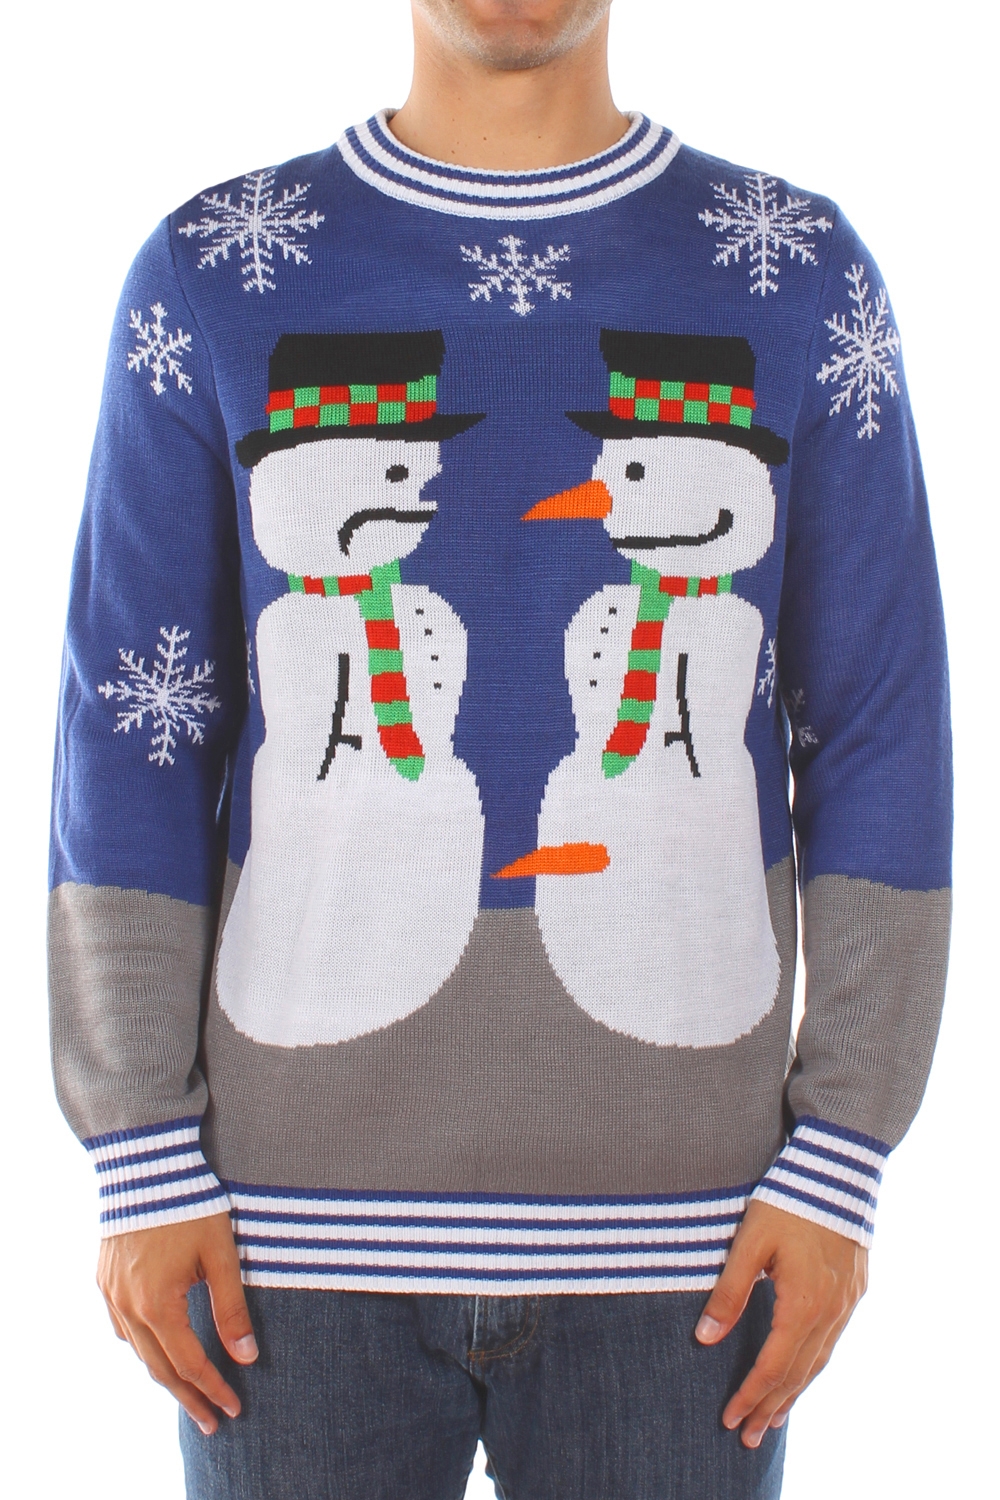 Snowman Nose Thief Christmas Sweater Image2